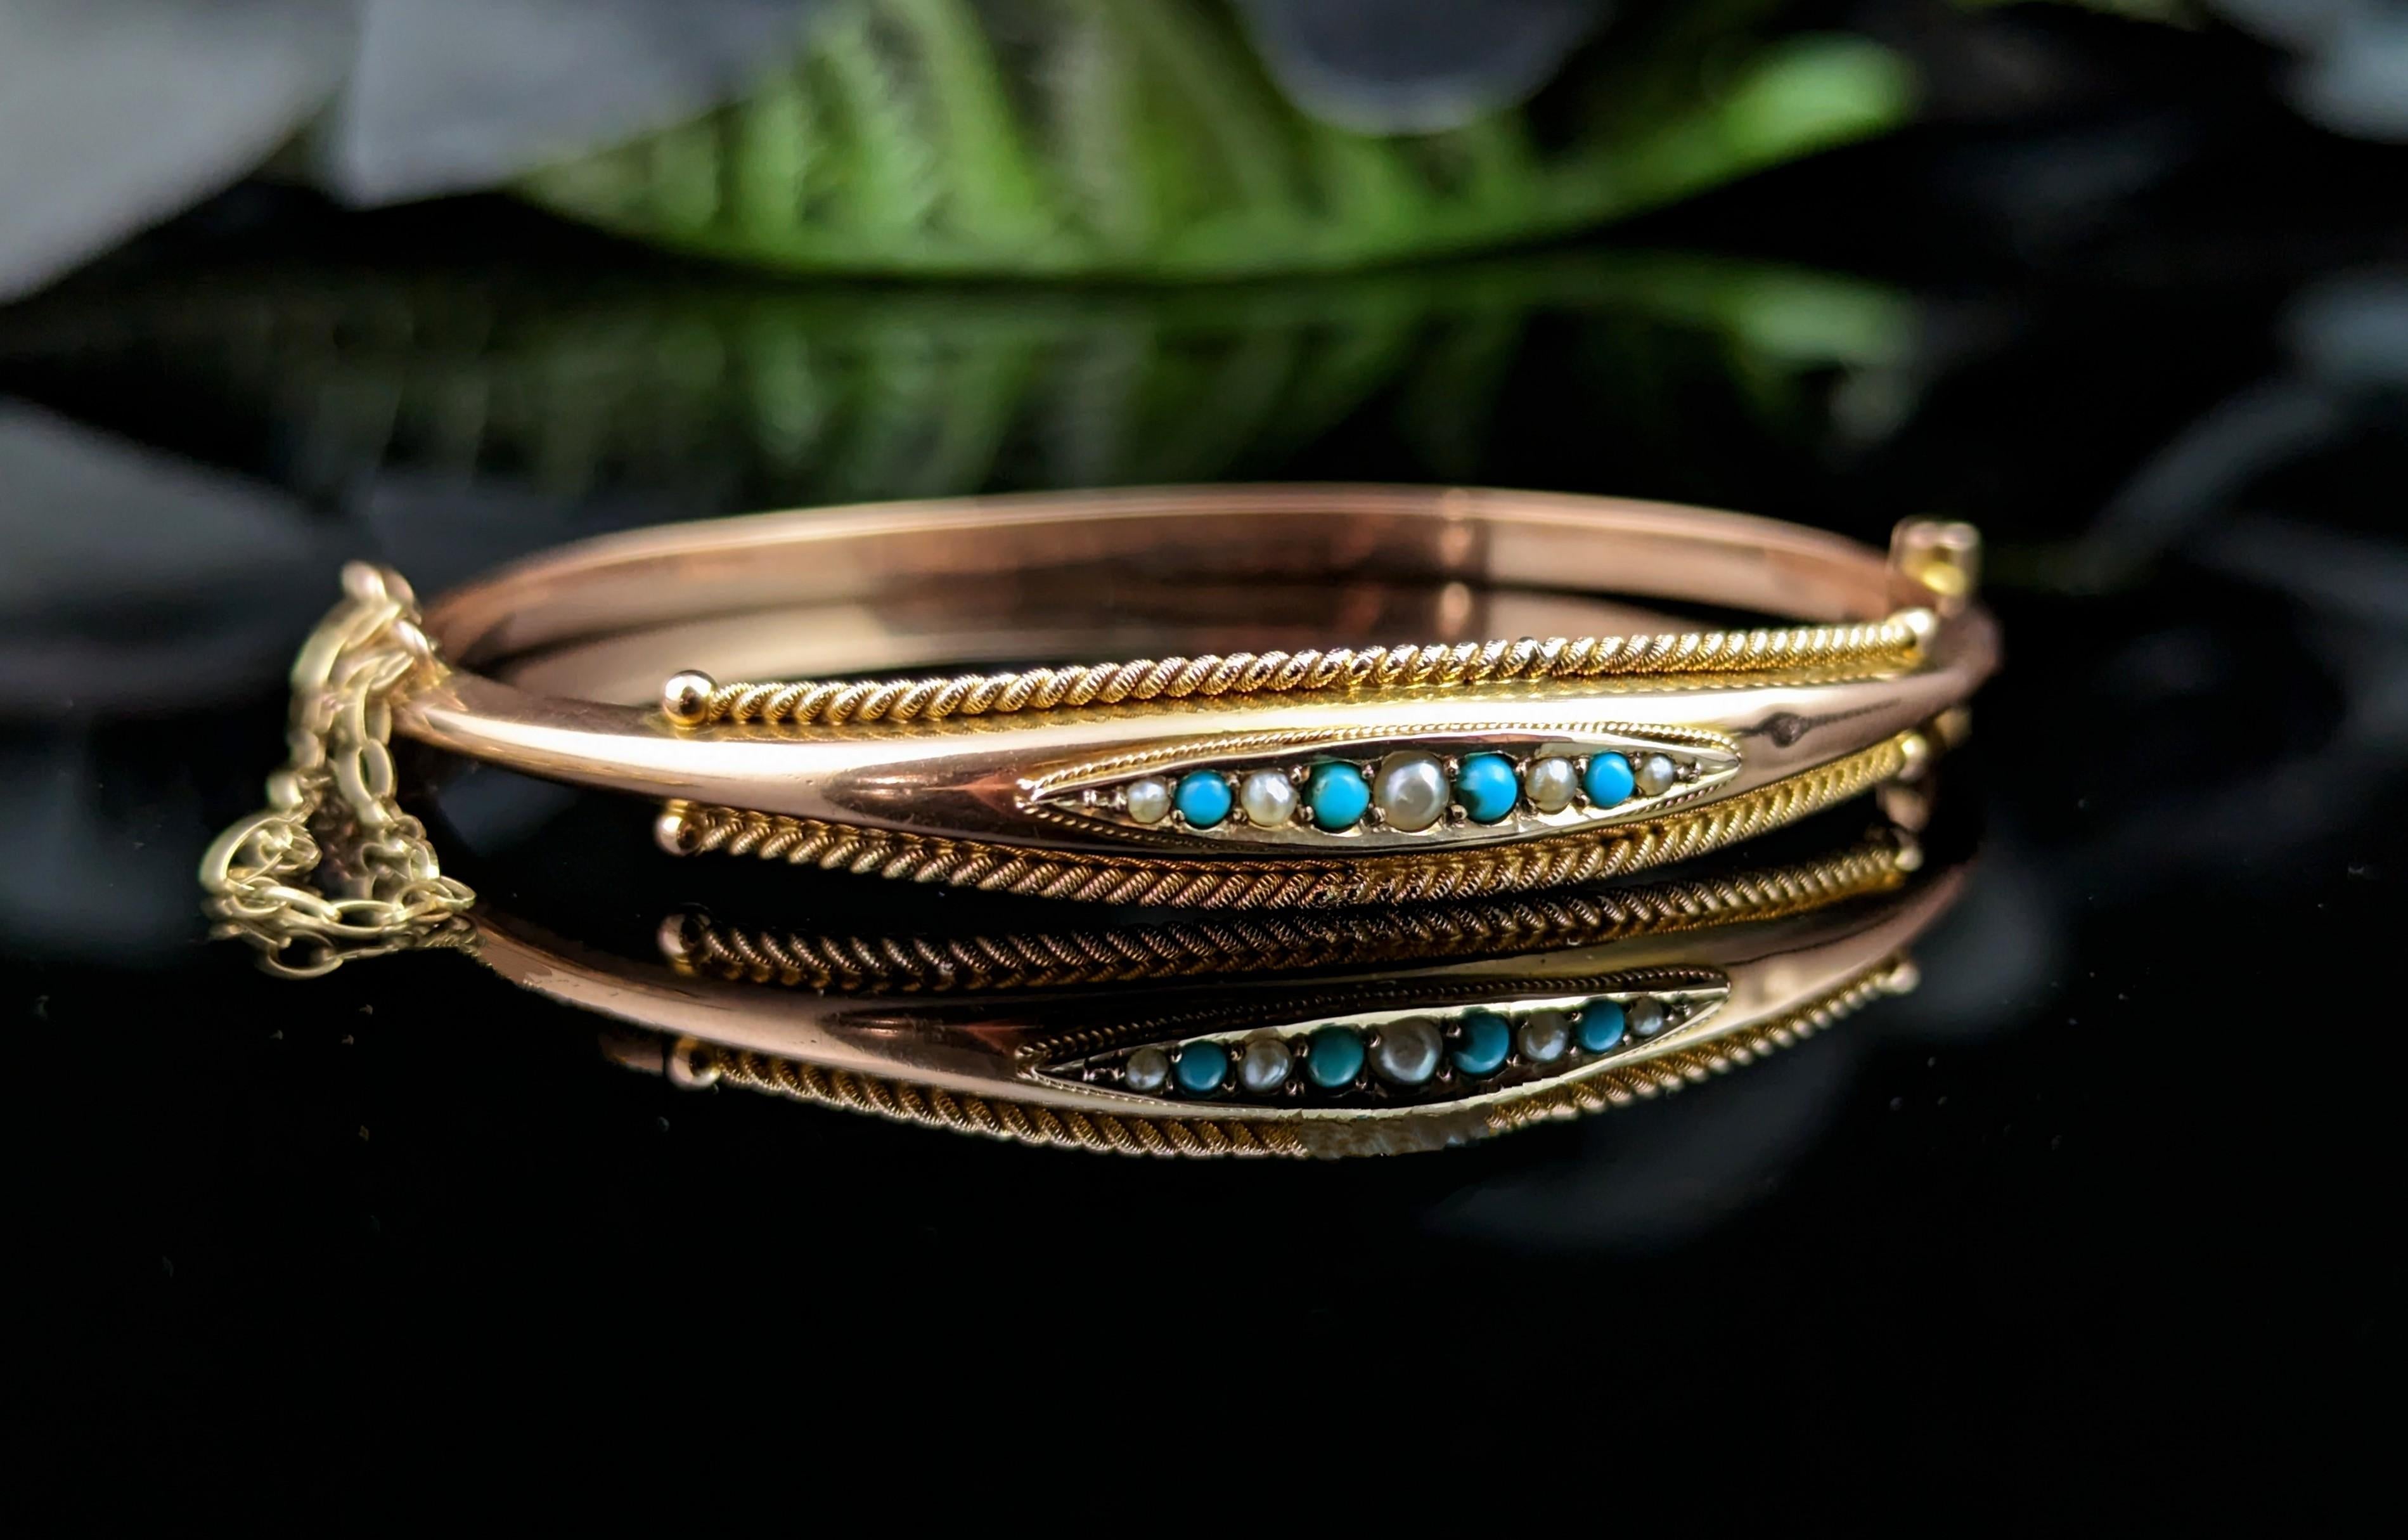 We love a good antique bangle here and this Beautiful Victorian 9kt Rose gold, Turquoise and pearl bangle is no exception.

It has a gorgeous classic design, a slim rose gold band with an elongated ellipse shaped face set with turquoise and seed